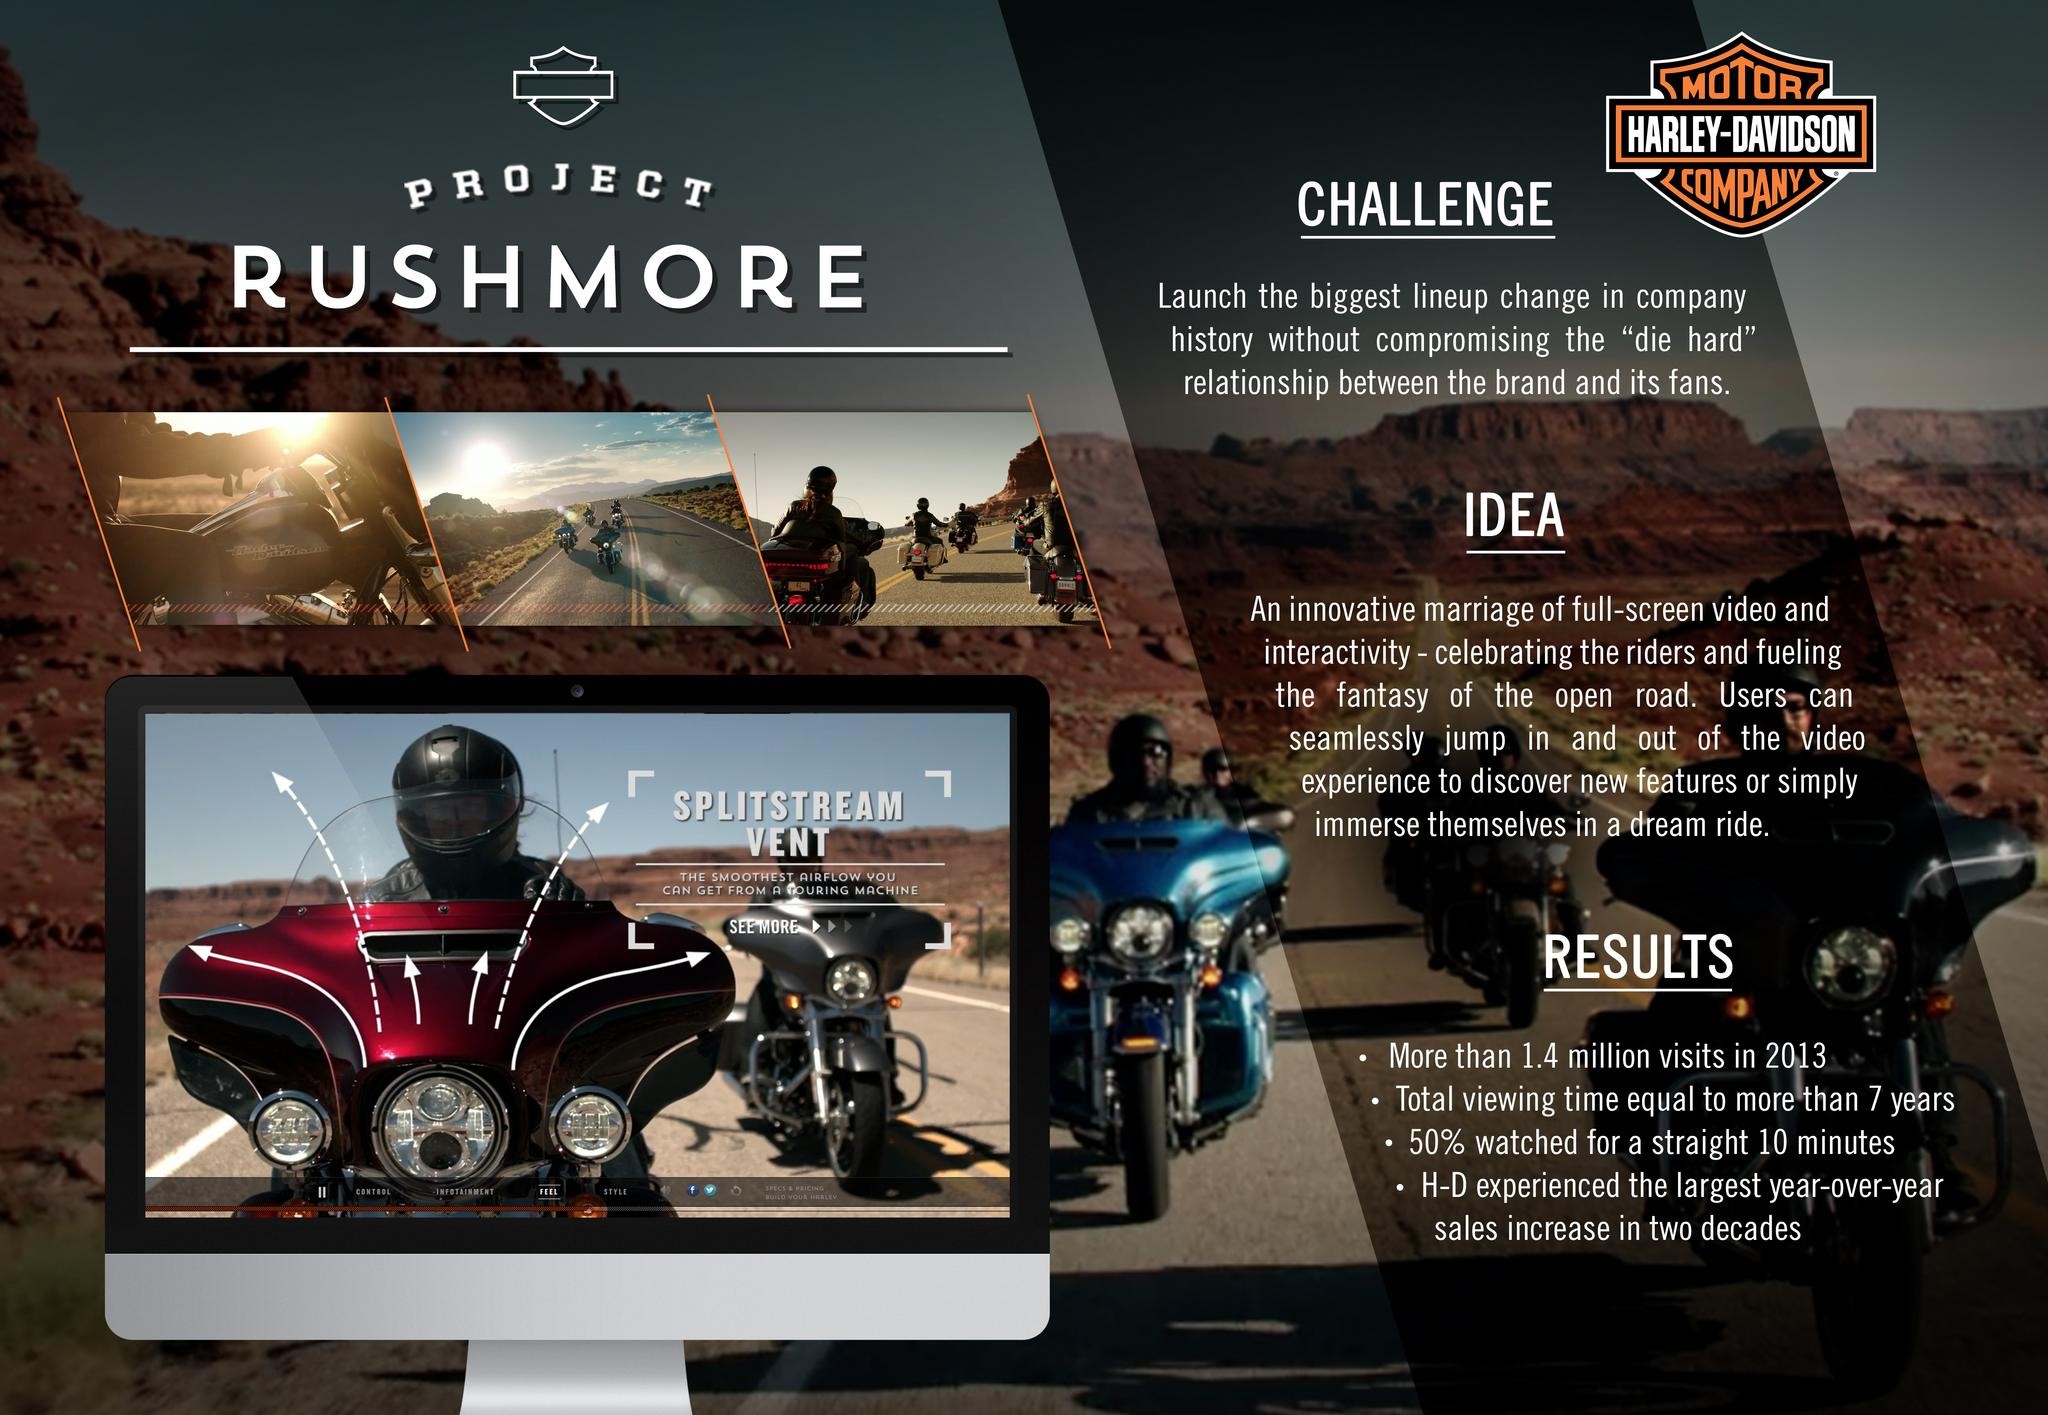 PROJECT RUSHMORE